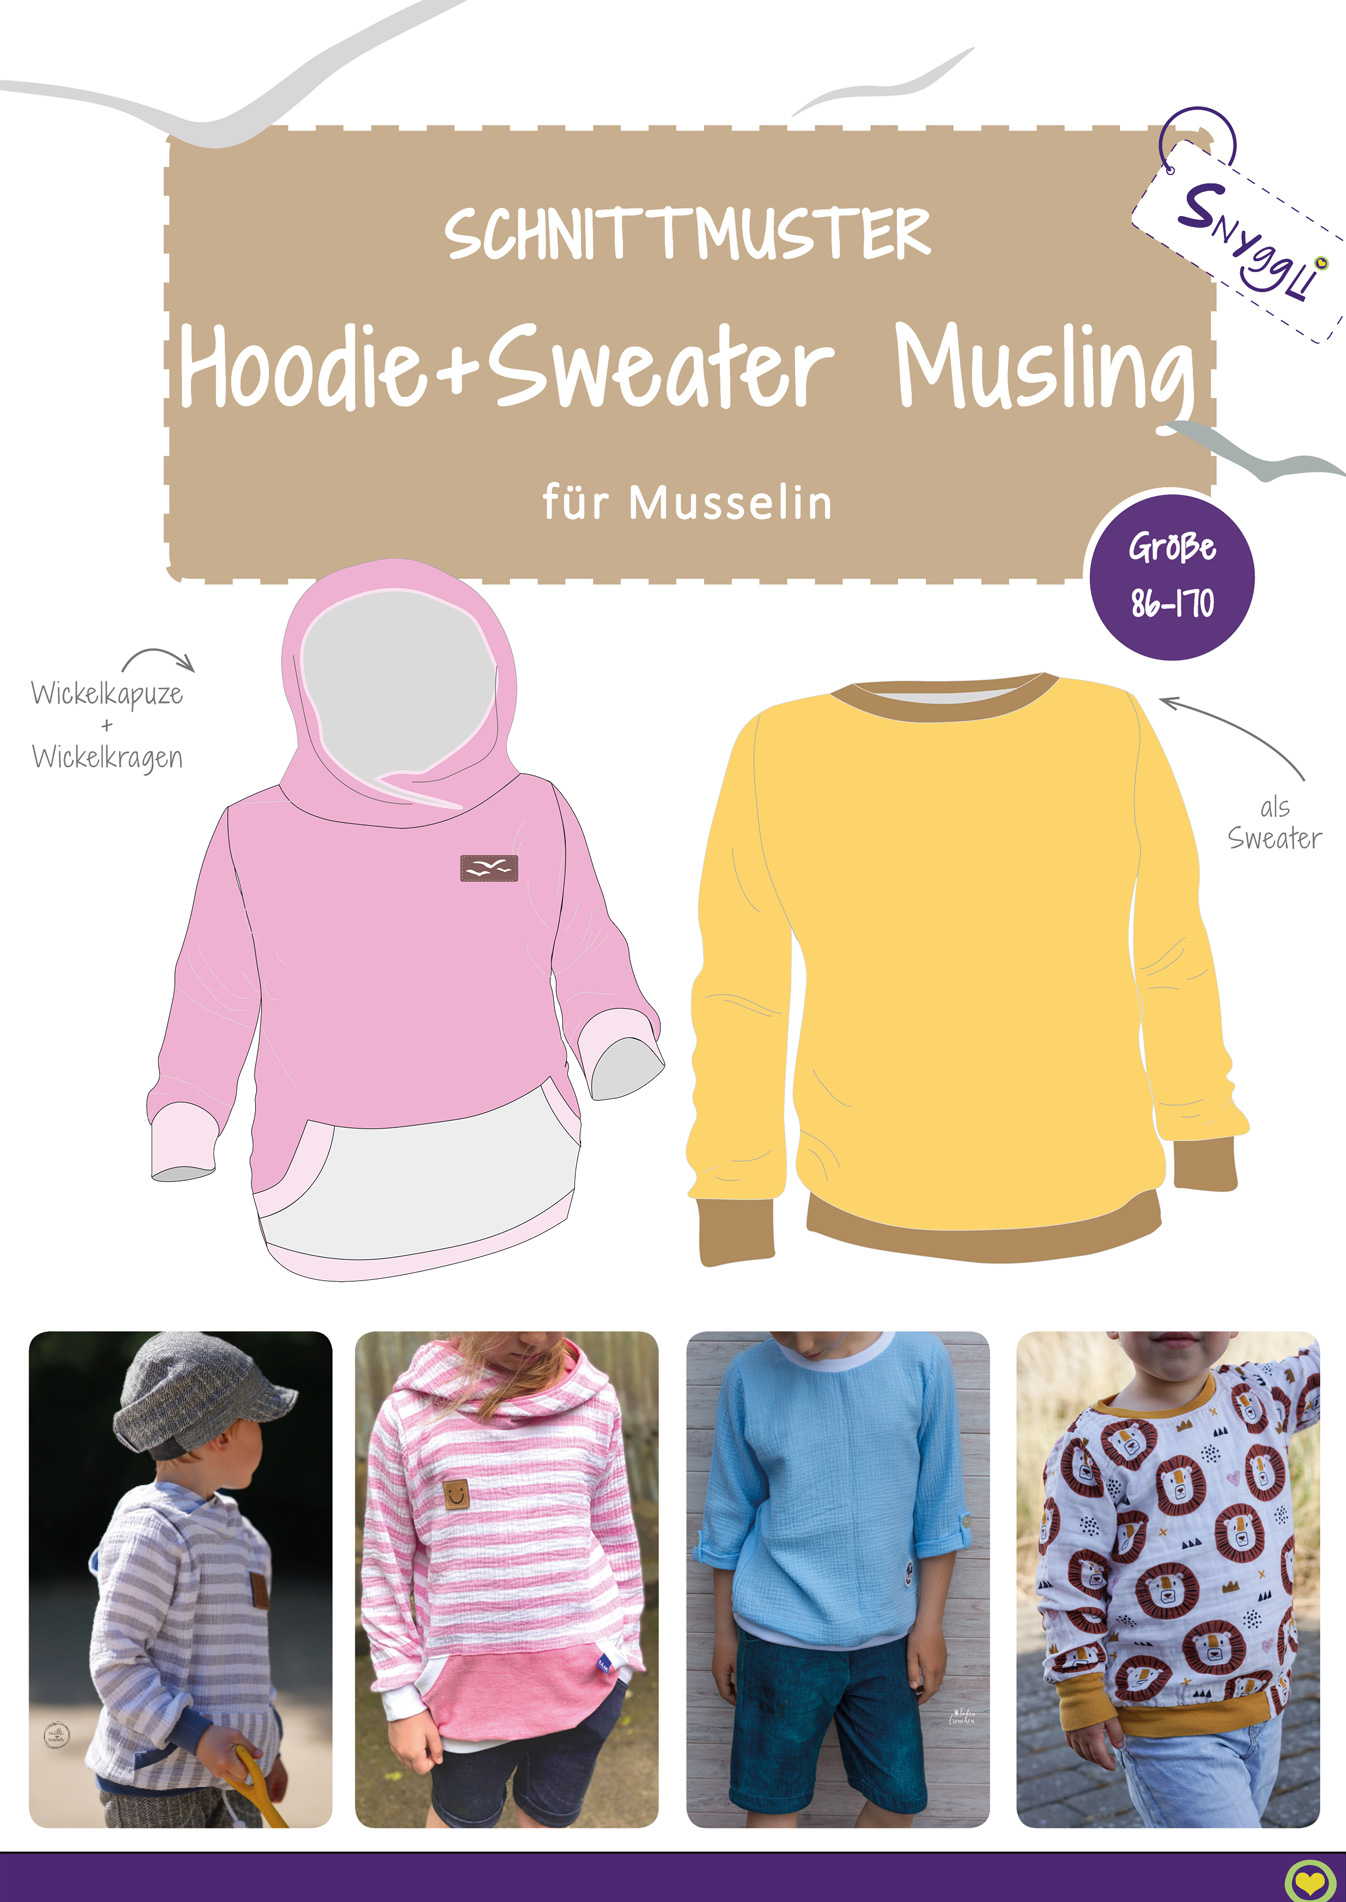 Snyggli-Schnittmuster-Musselin-Hoodie-Musling-cover